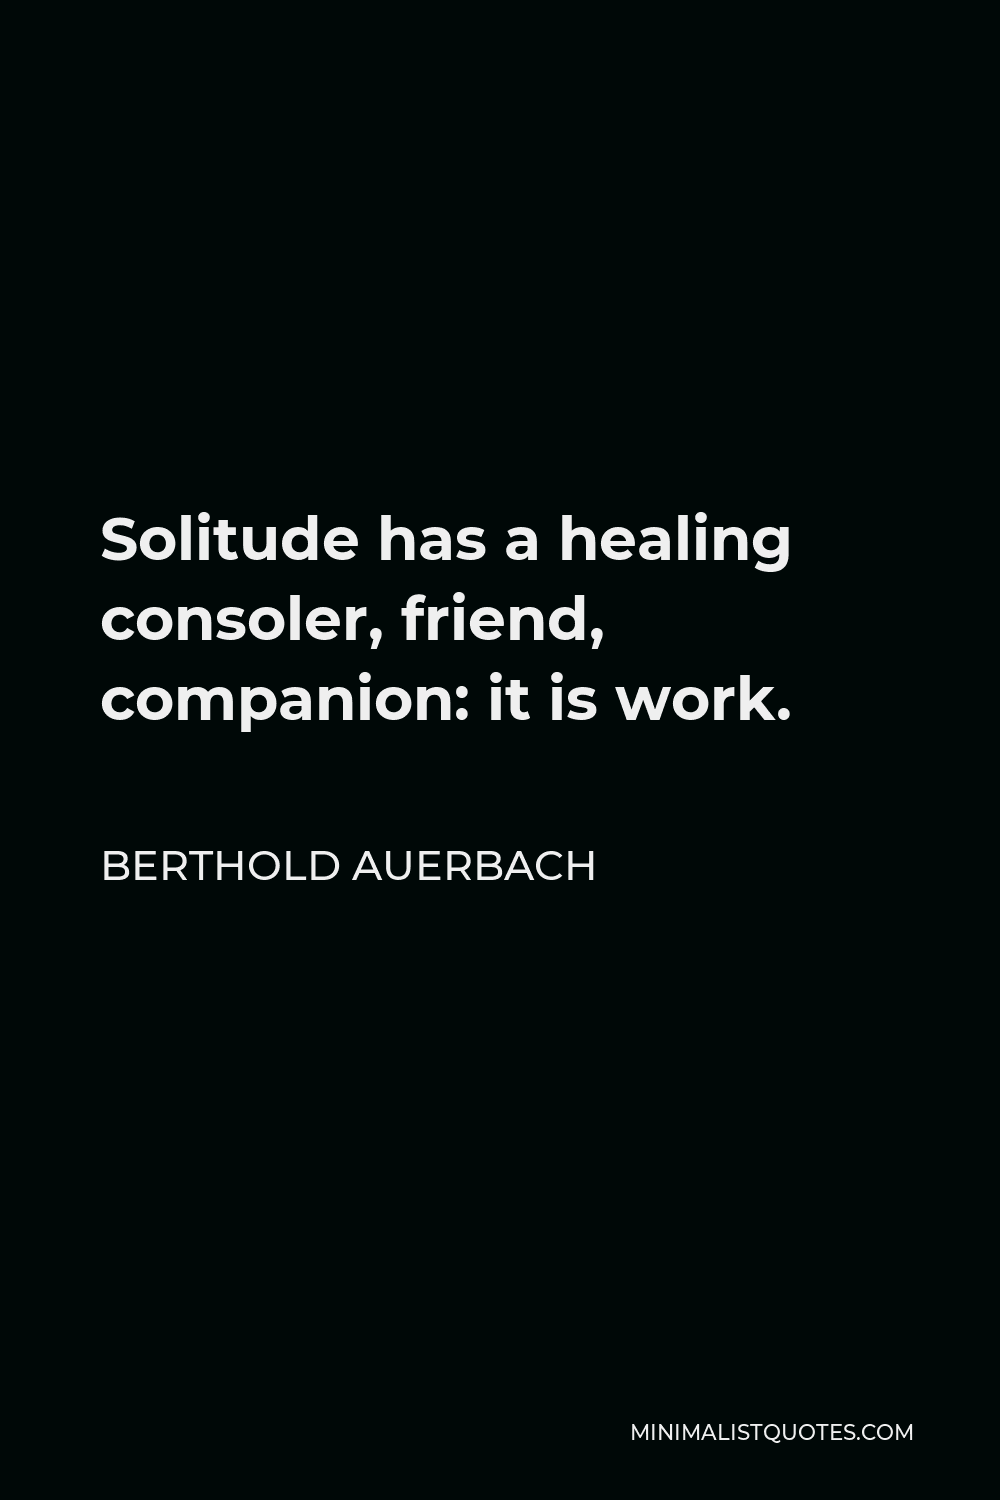 Berthold Auerbach Quote - Solitude has a healing consoler, friend, companion: it is work.